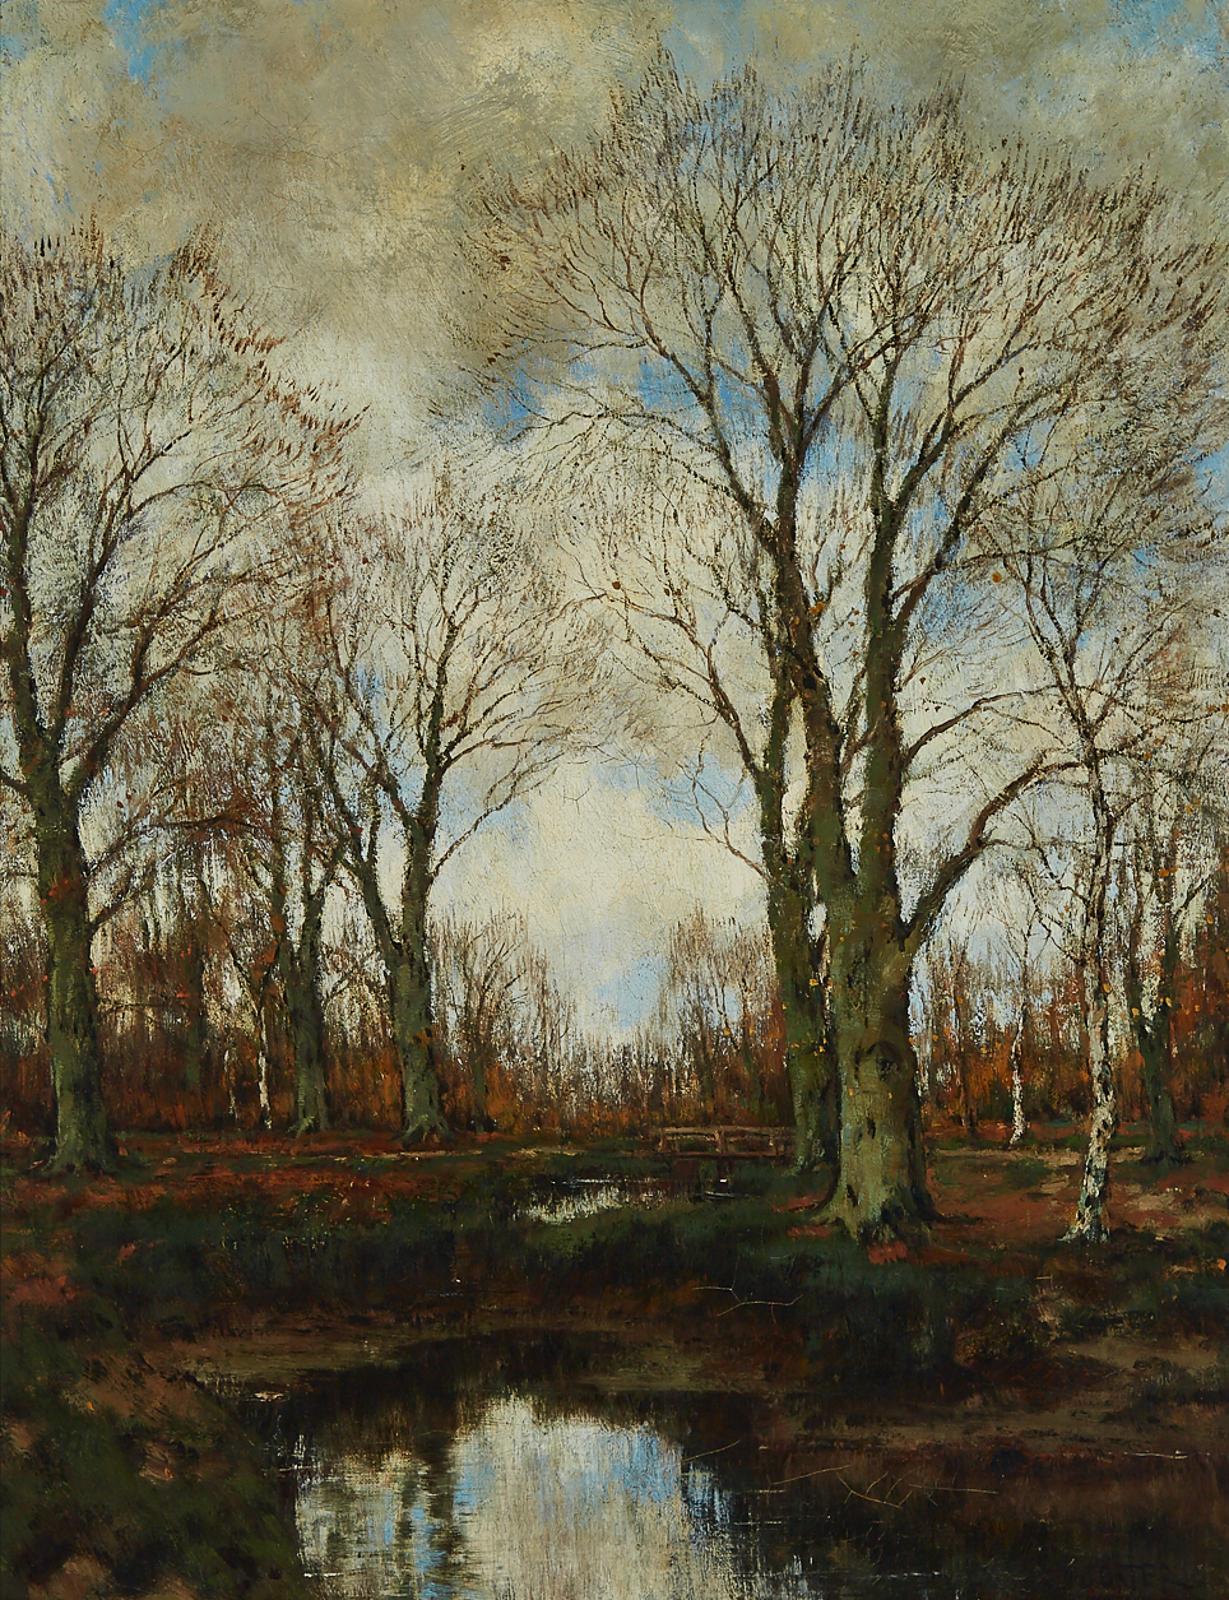 Arnold Marc Gorter (1866-1933) - View Of A Brook In An Autumnal Landscape